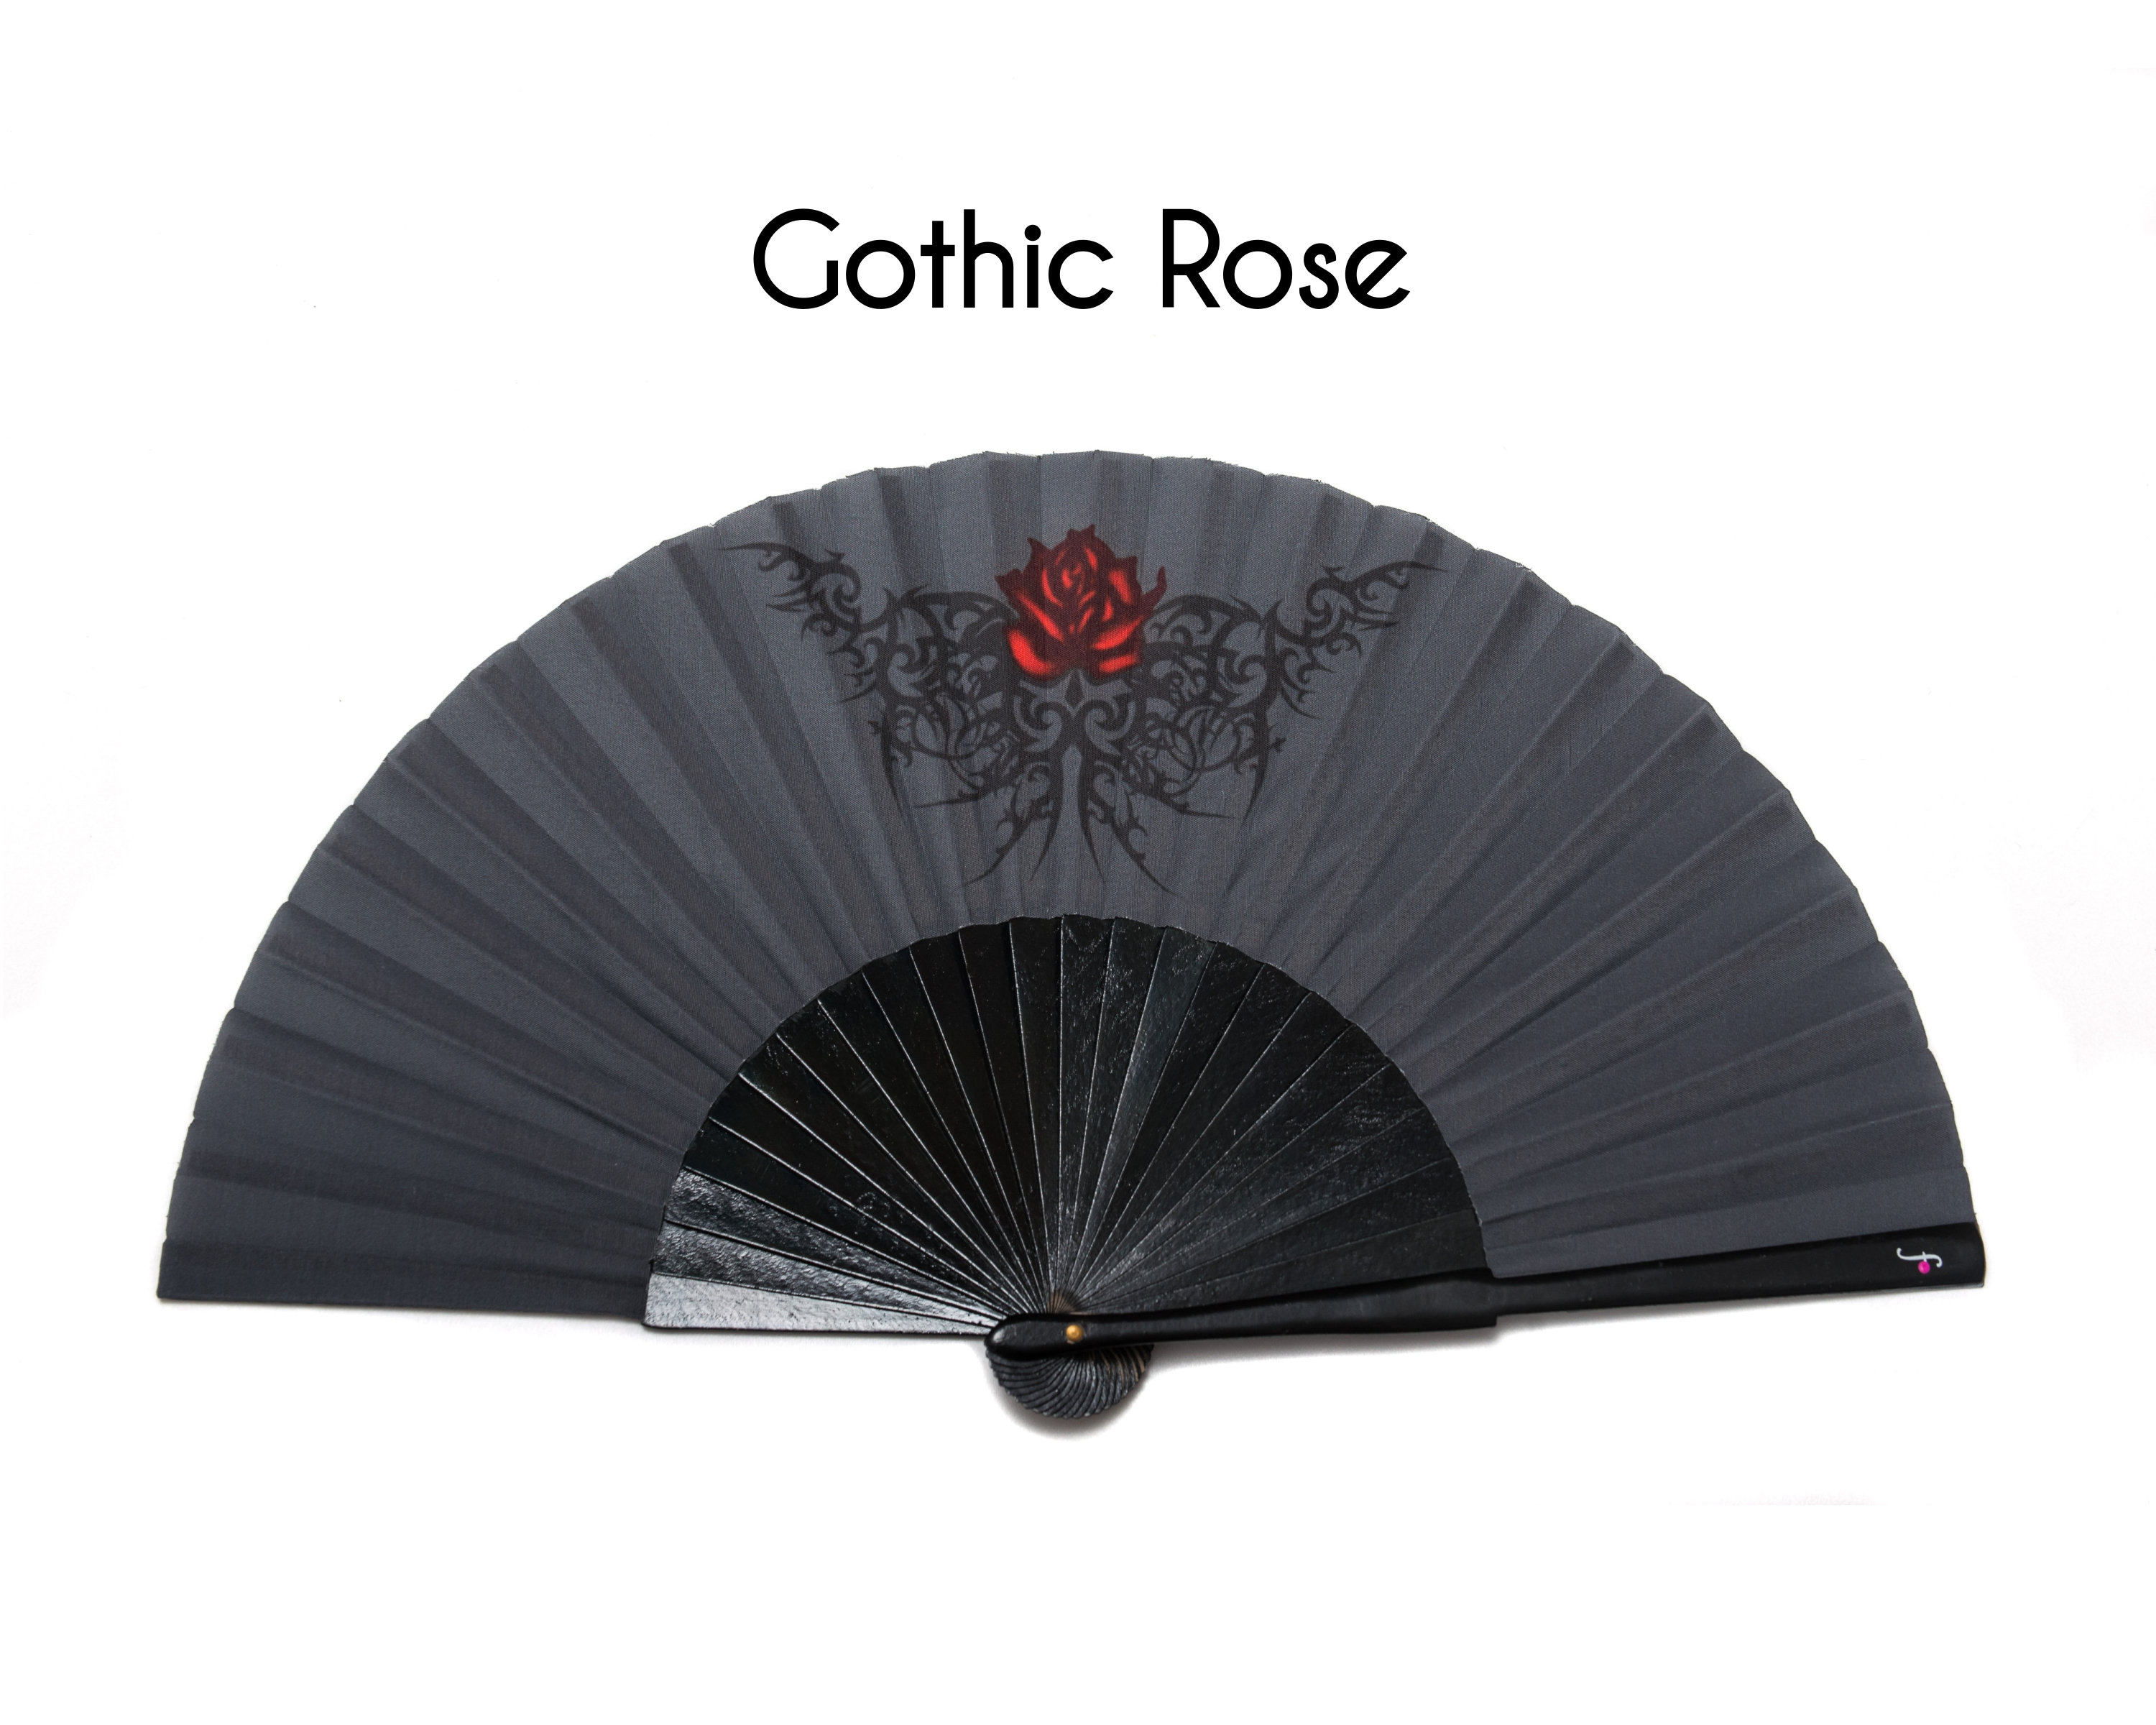 Sky Thanksgiving Efterforskning GOTHIC ROSE: Goth Style Folding Hand Fan Black With Red Rose - Etsy  Singapore